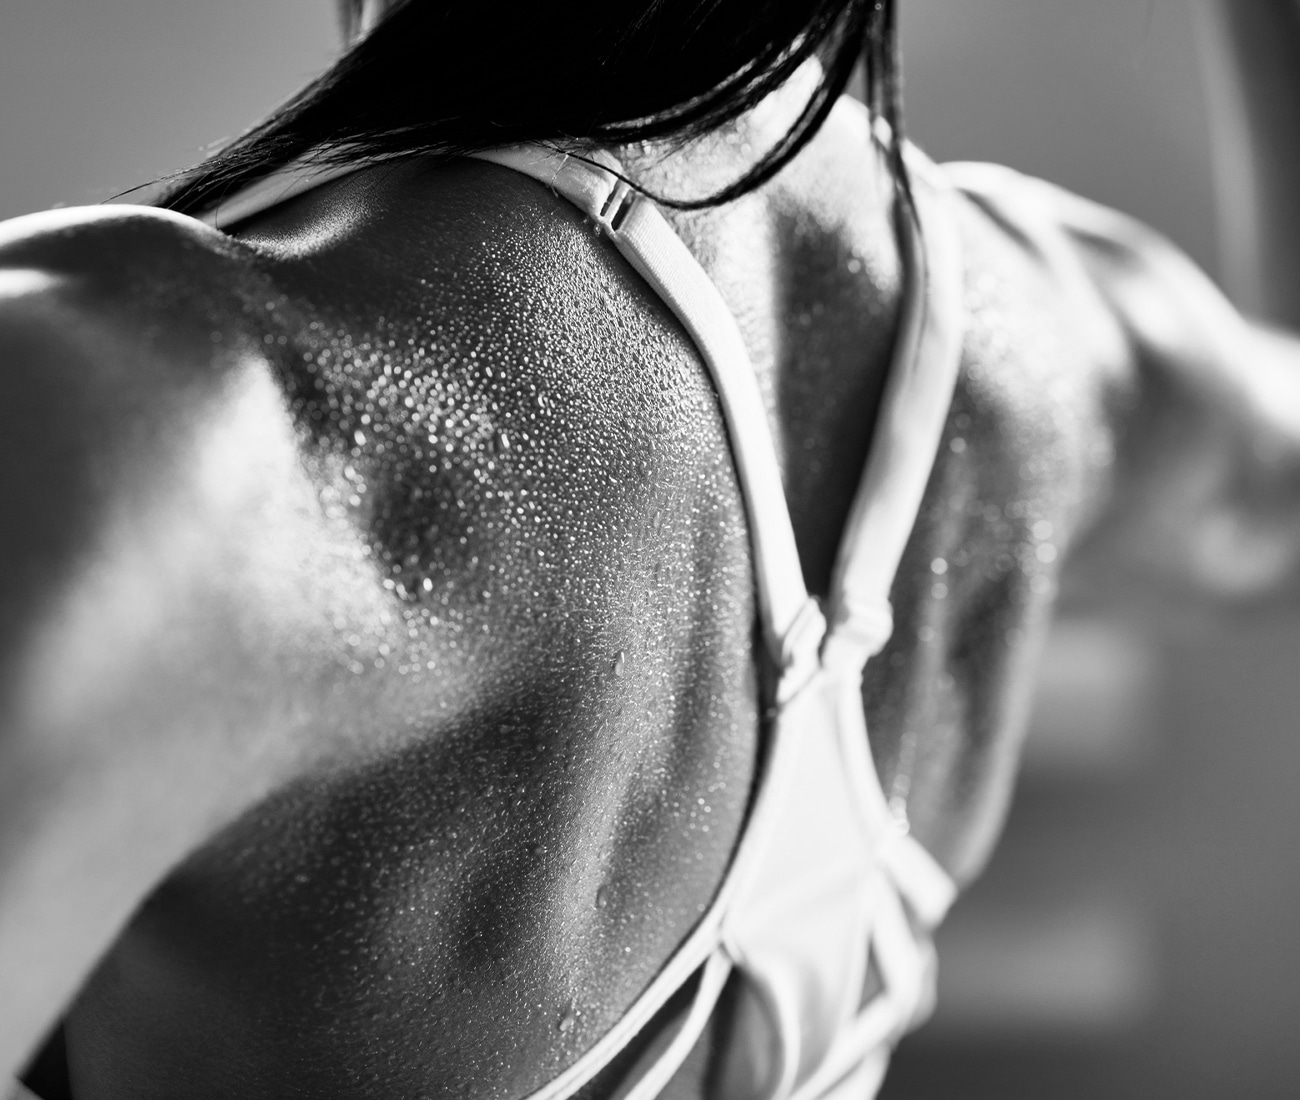 Close Up Of A Woman's Muscular Back In A Bra, Black And White Photo